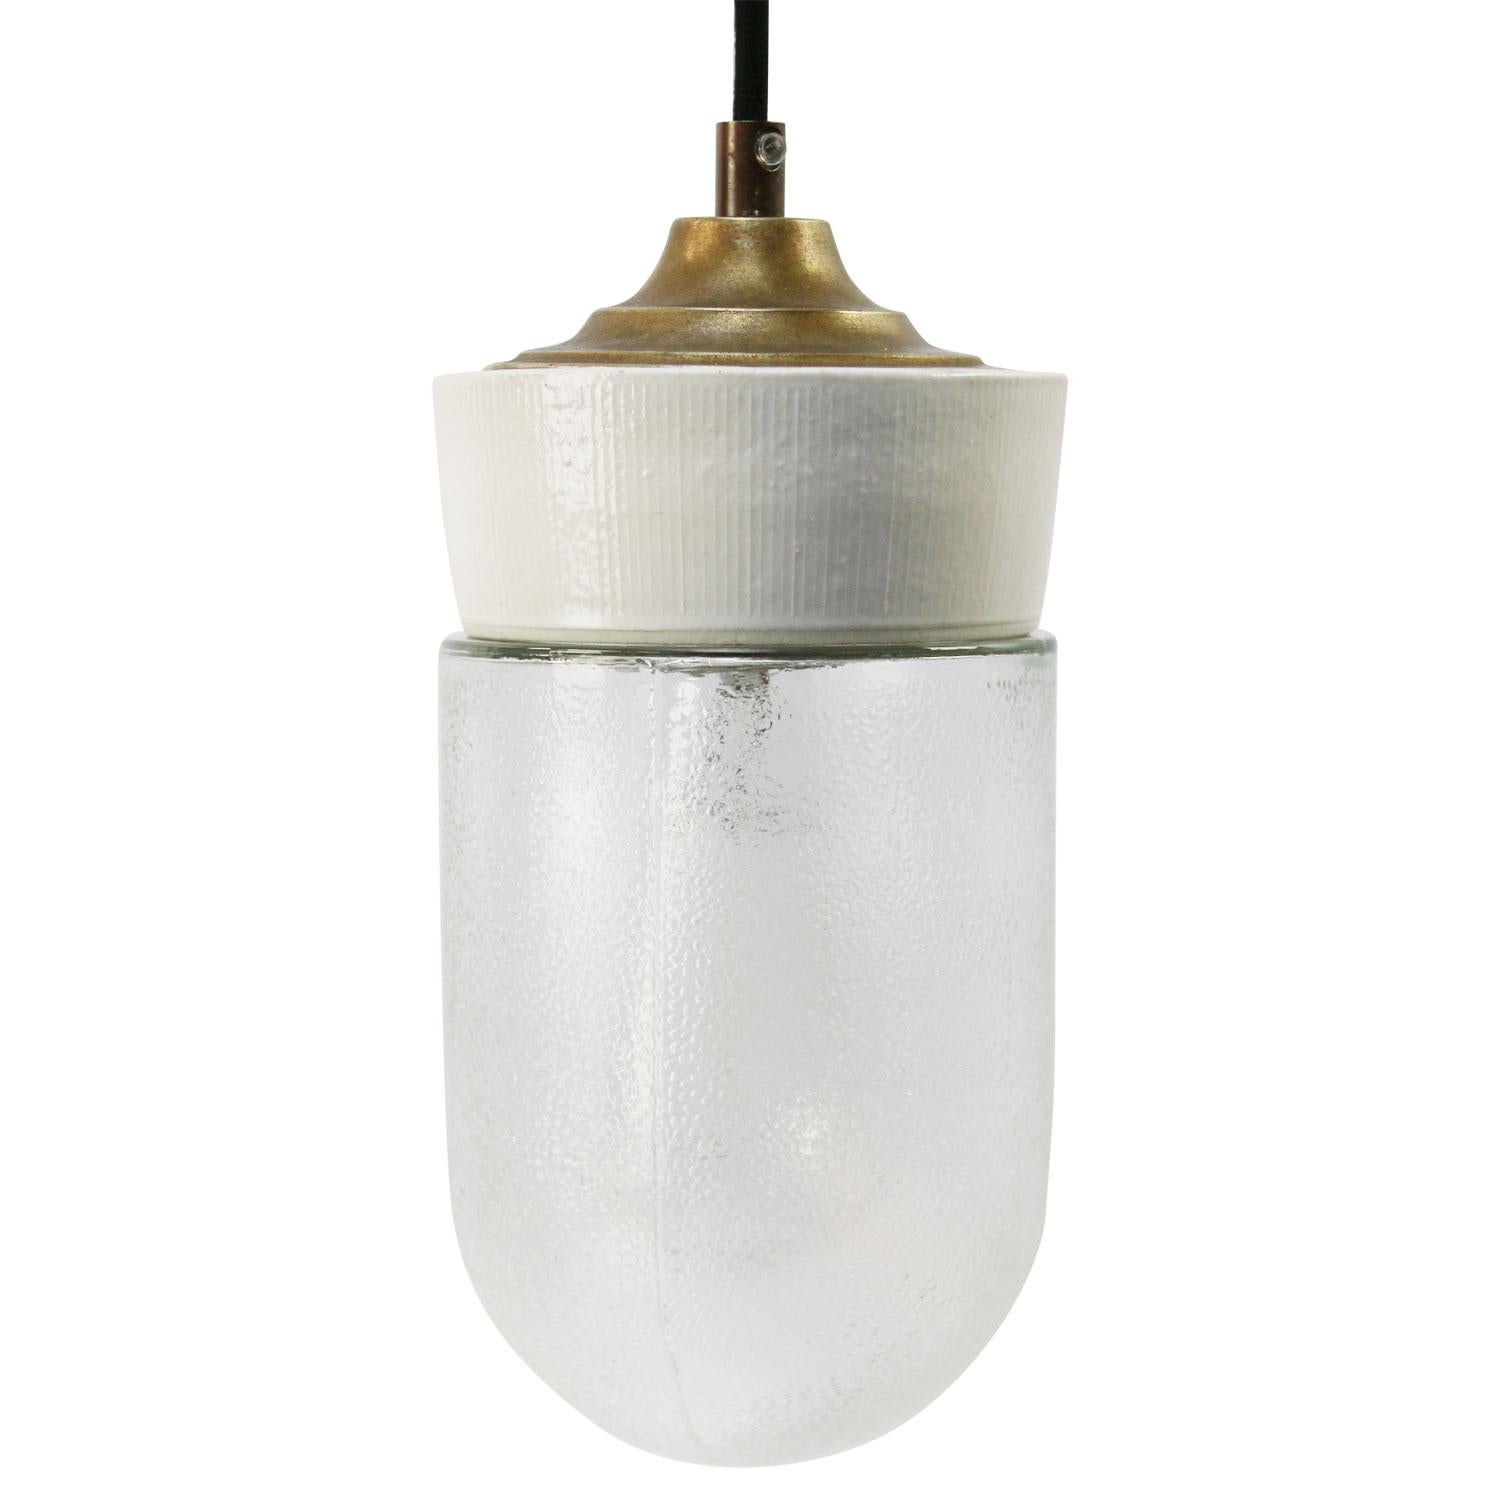 Porcelain industrial hanging lamp.
White porcelain, brass and frosted glass.
2 conductors, no ground.

Weight: 2.00 kg / 4.4 lb

Priced per individual item. All lamps have been made suitable by international standards for incandescent light